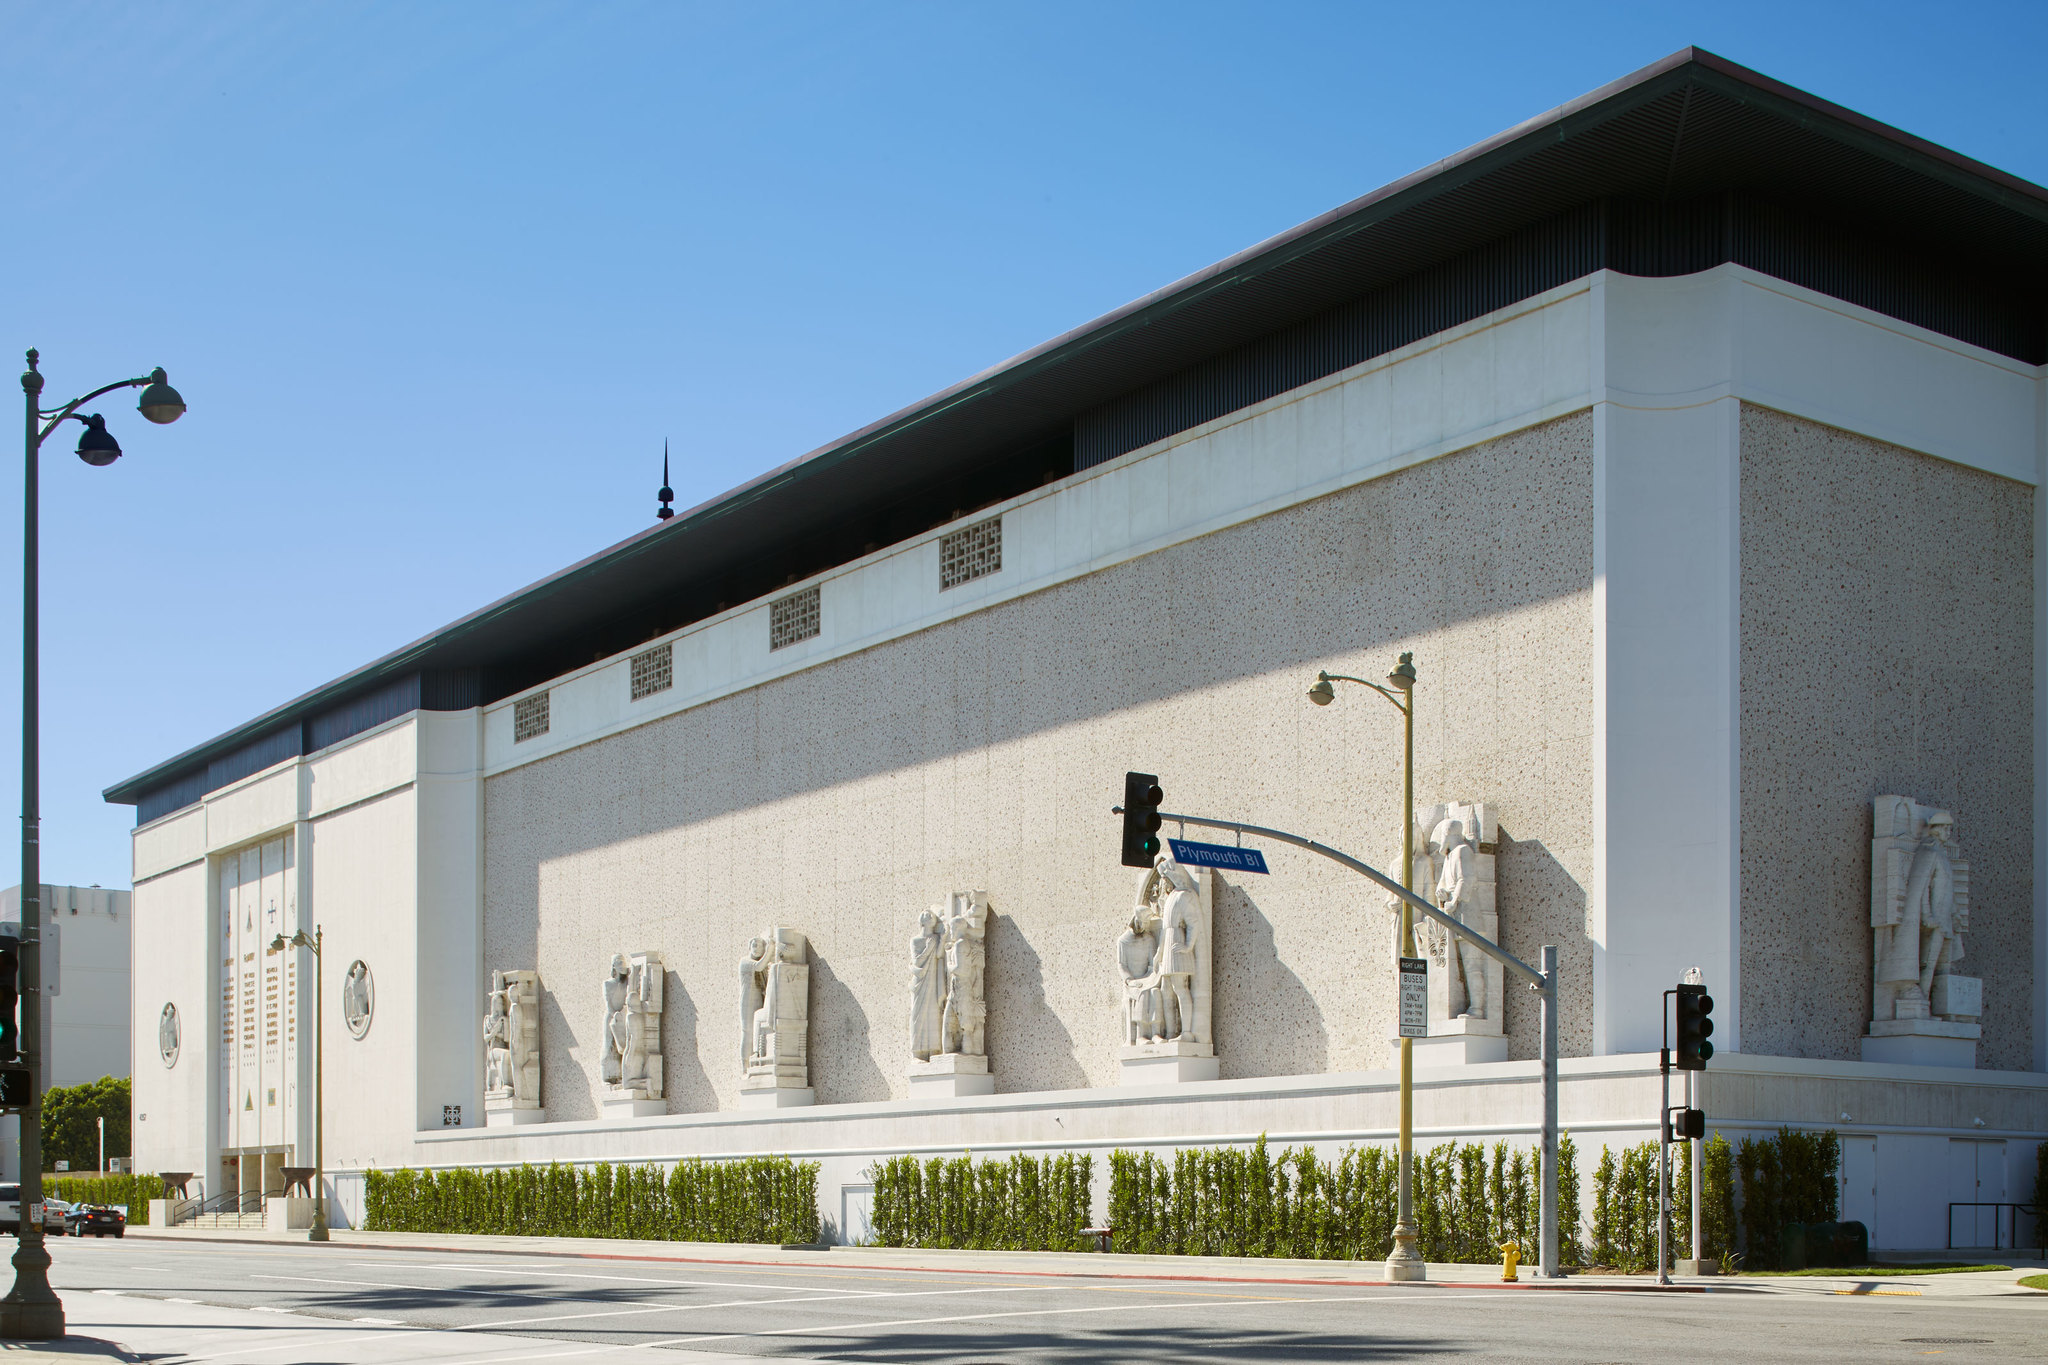 The exterior of the Marciano Art Foundation, housed in the former Scottish Rite Masonic Temple on Wilshire Boulevard in Los Angeles.